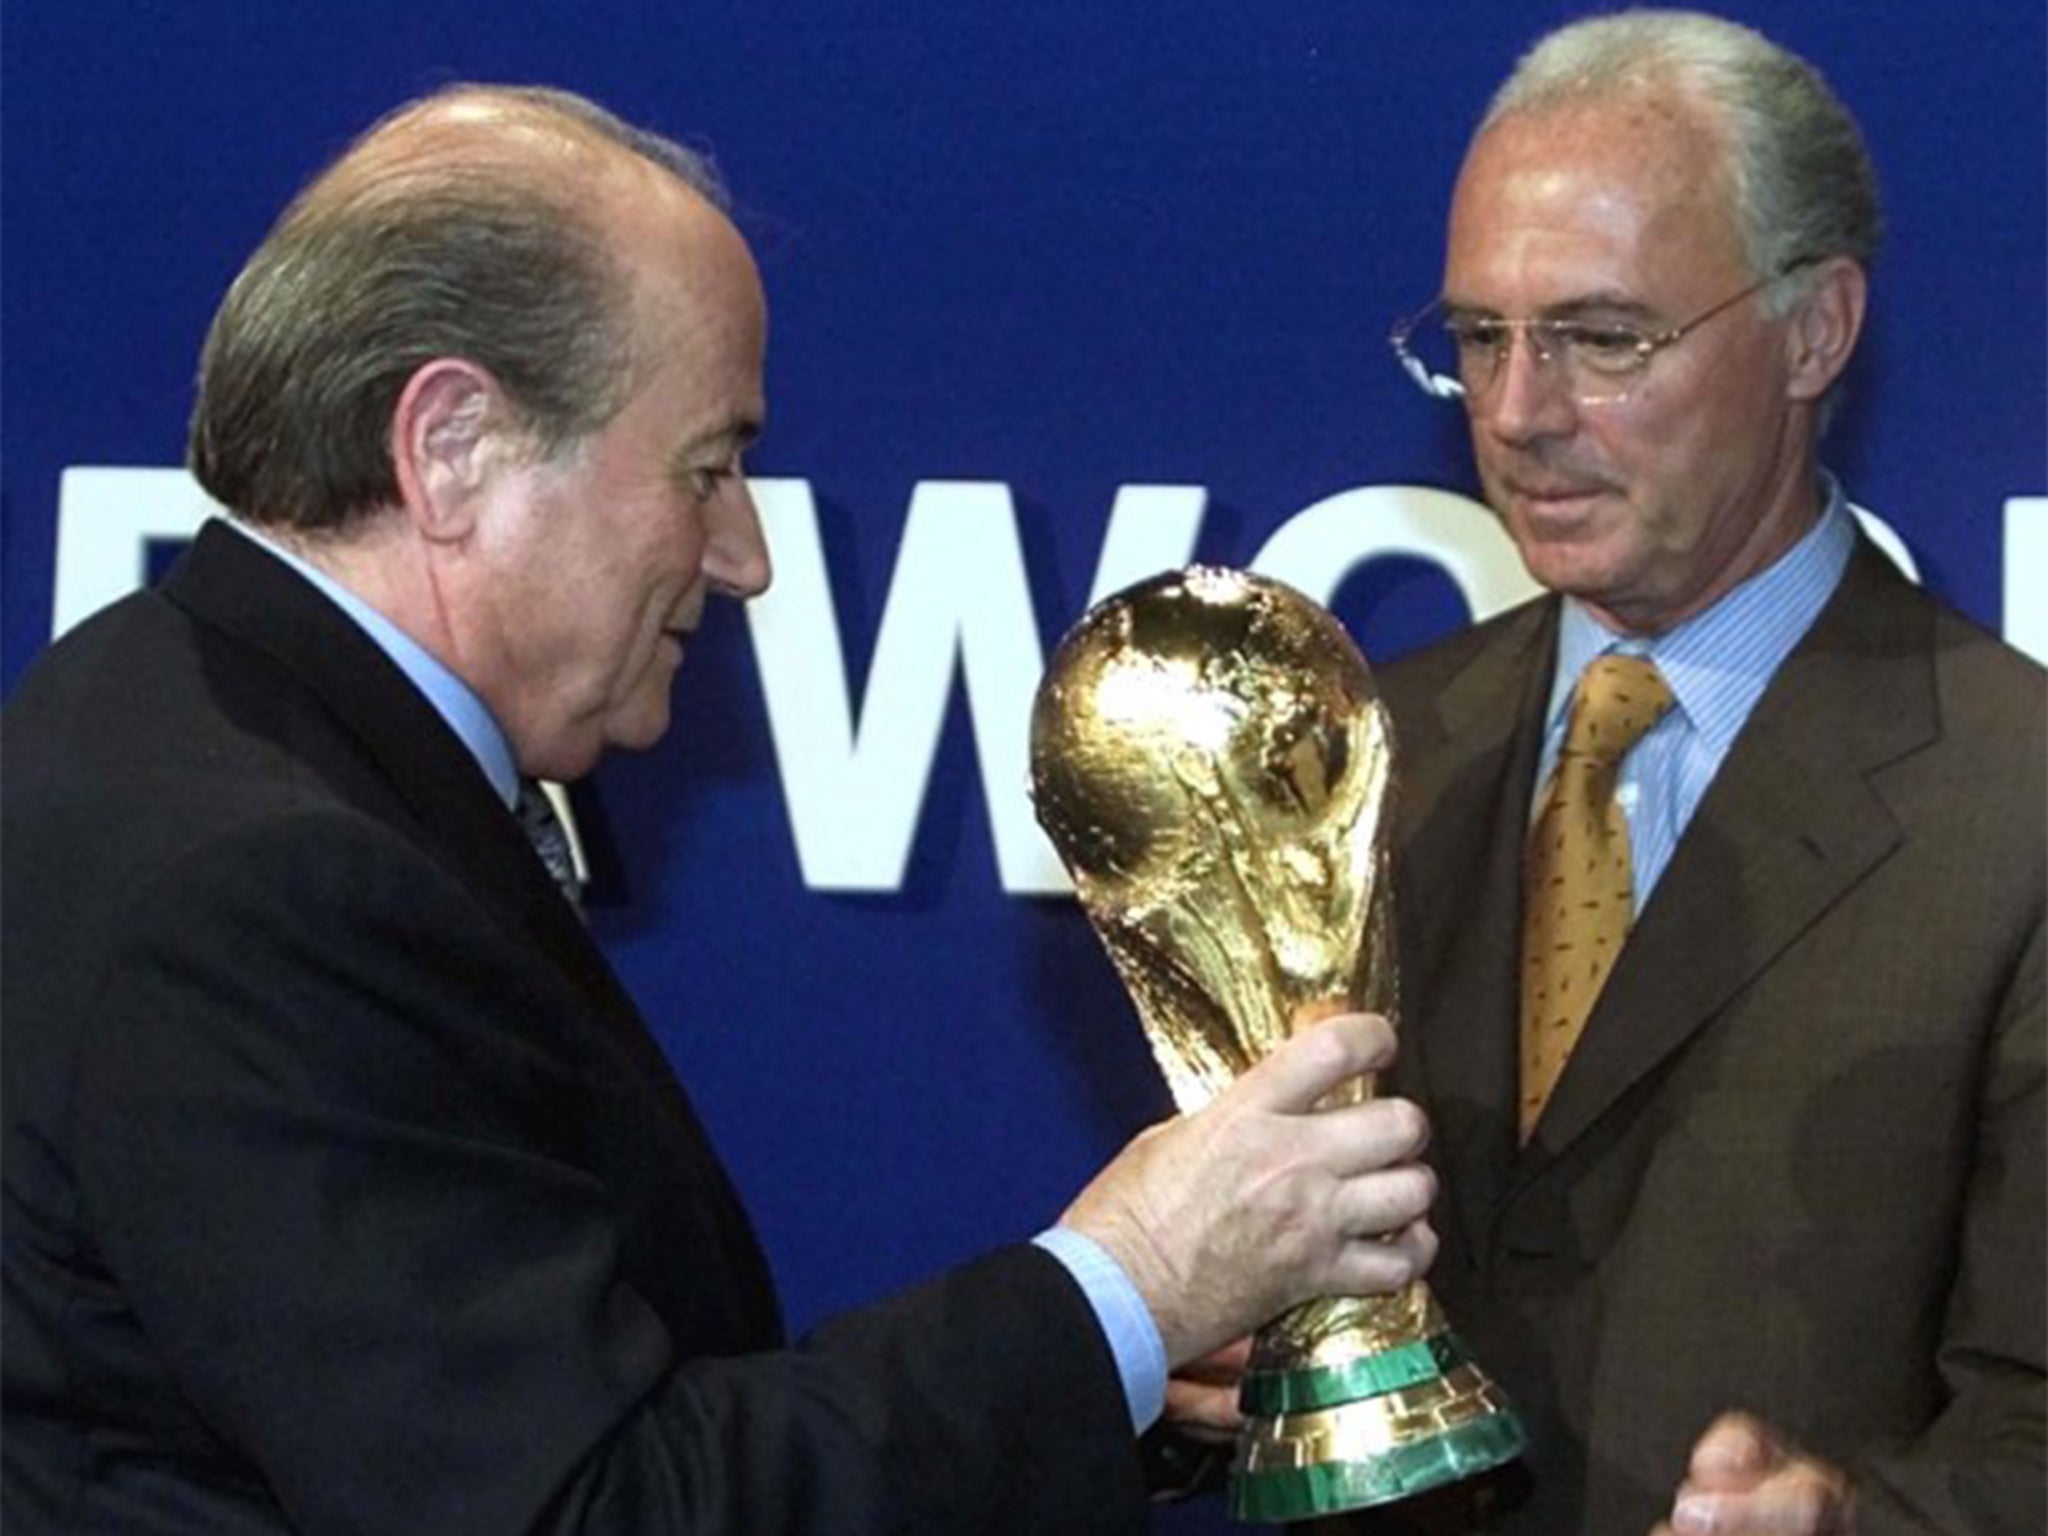 Sepp Blatter with Franz Beckenbauer right, July 2000 handing over a copy of the World Cup trophy